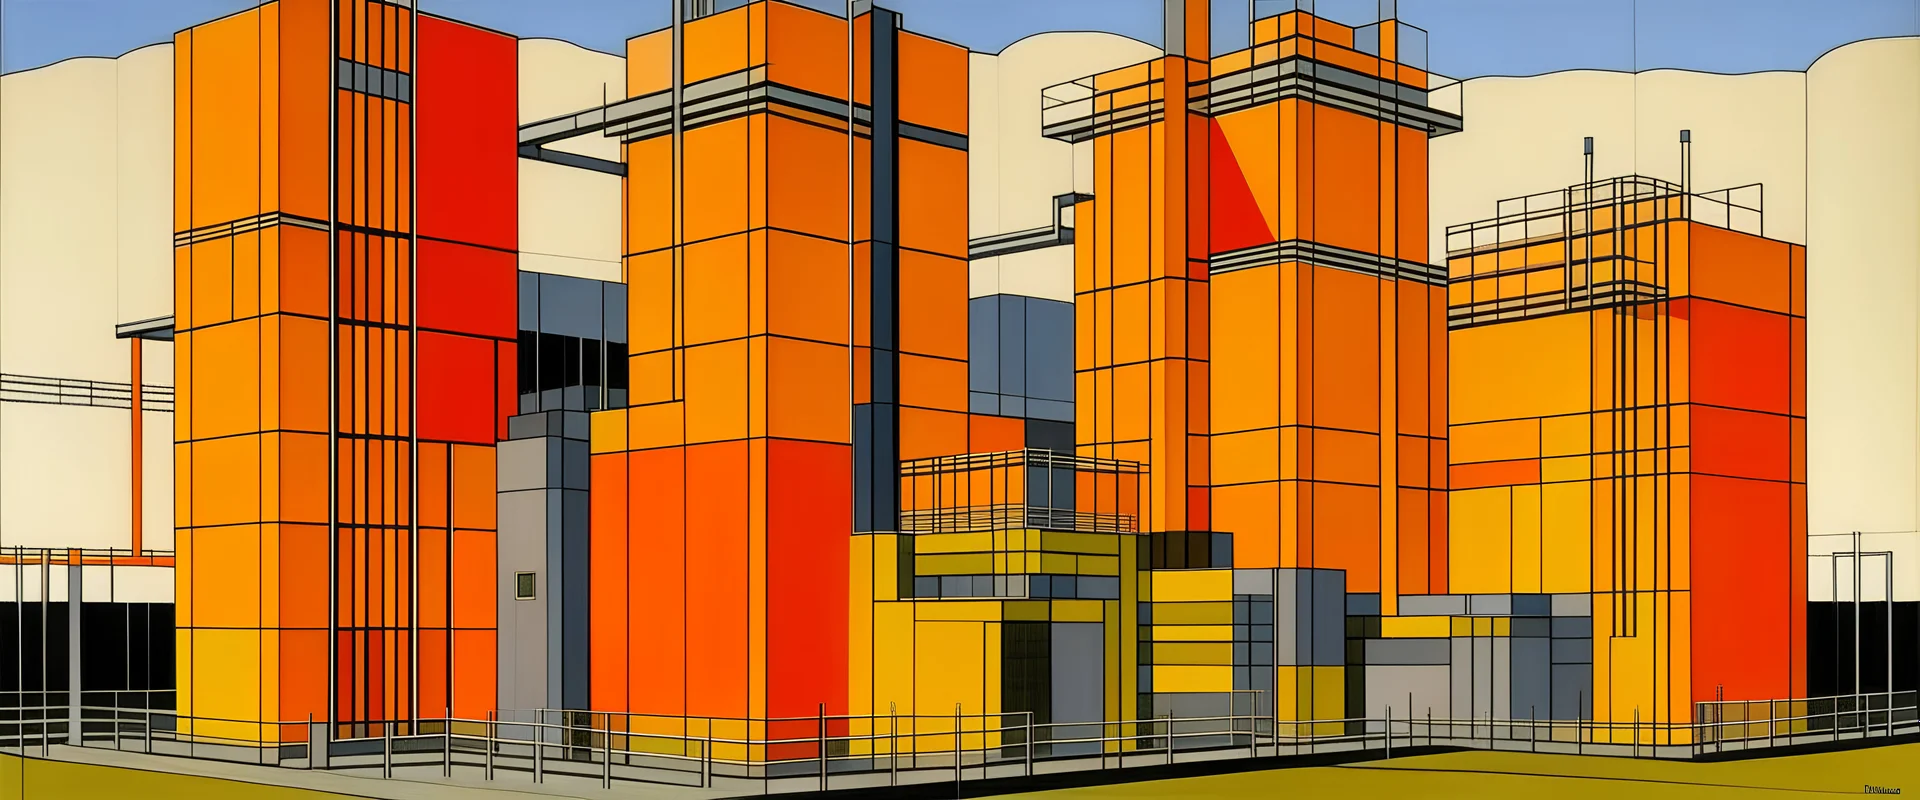 An orange electrical power plant painted by Piet Mondrian